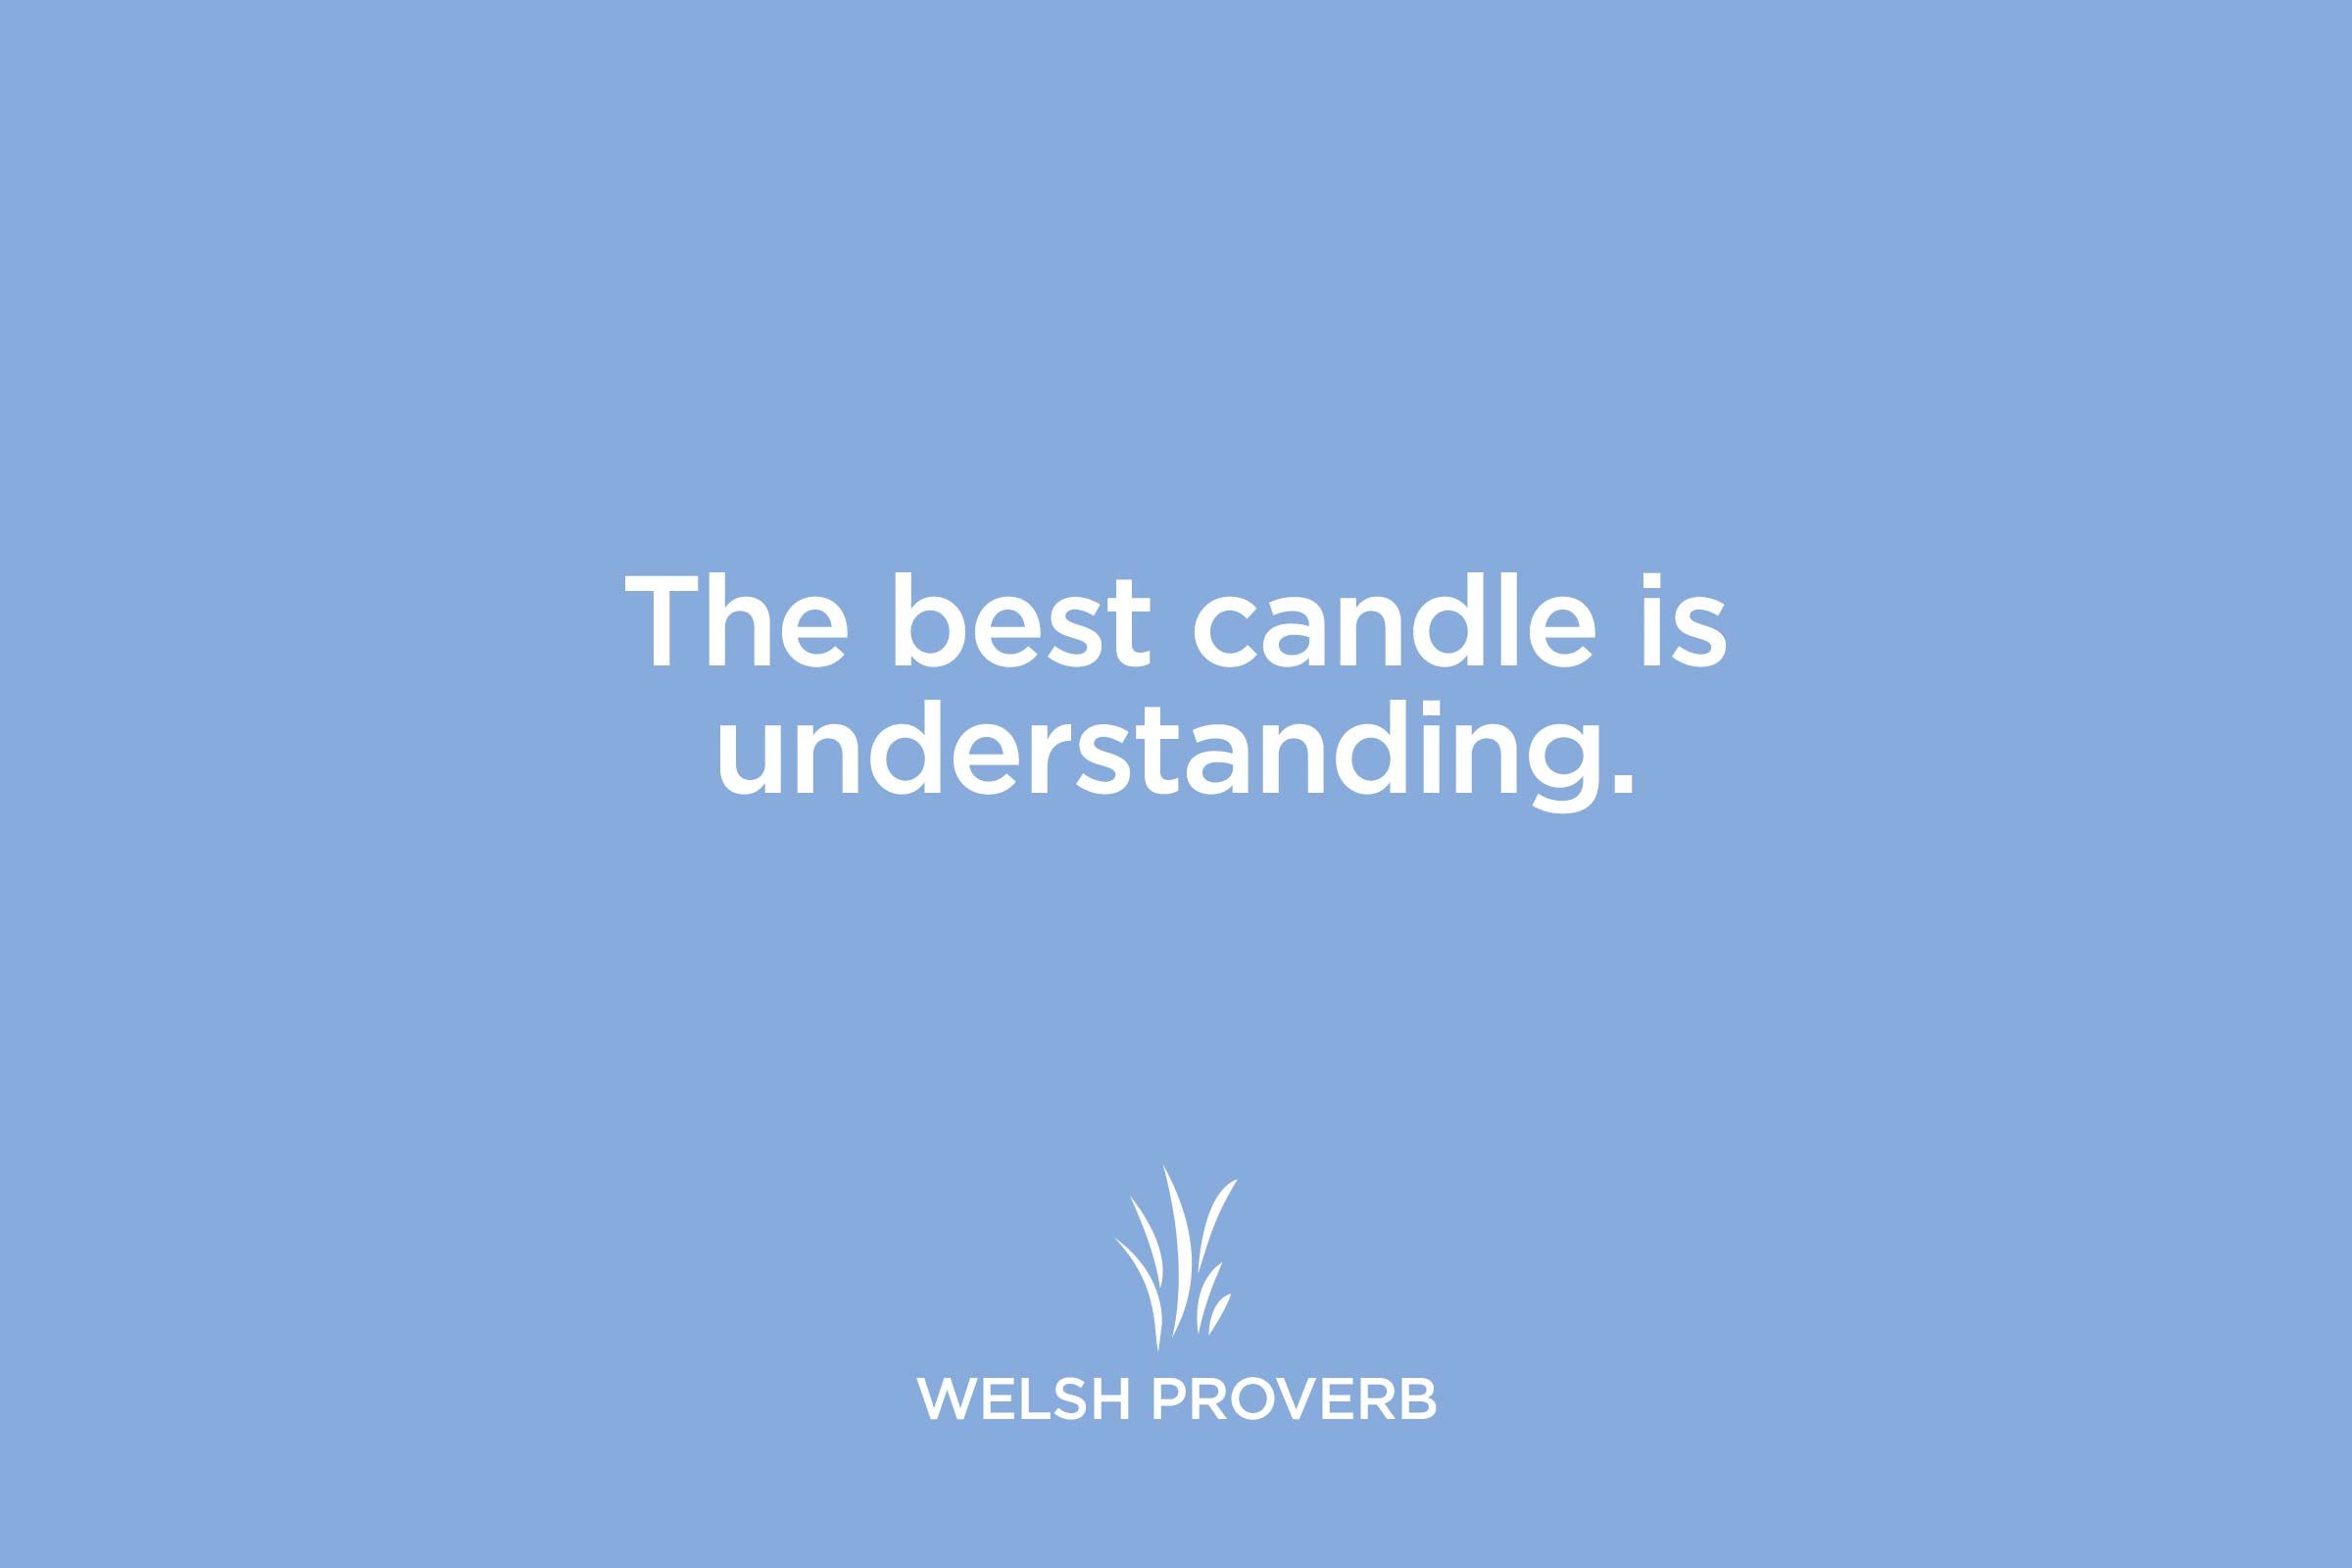 welsh proverb